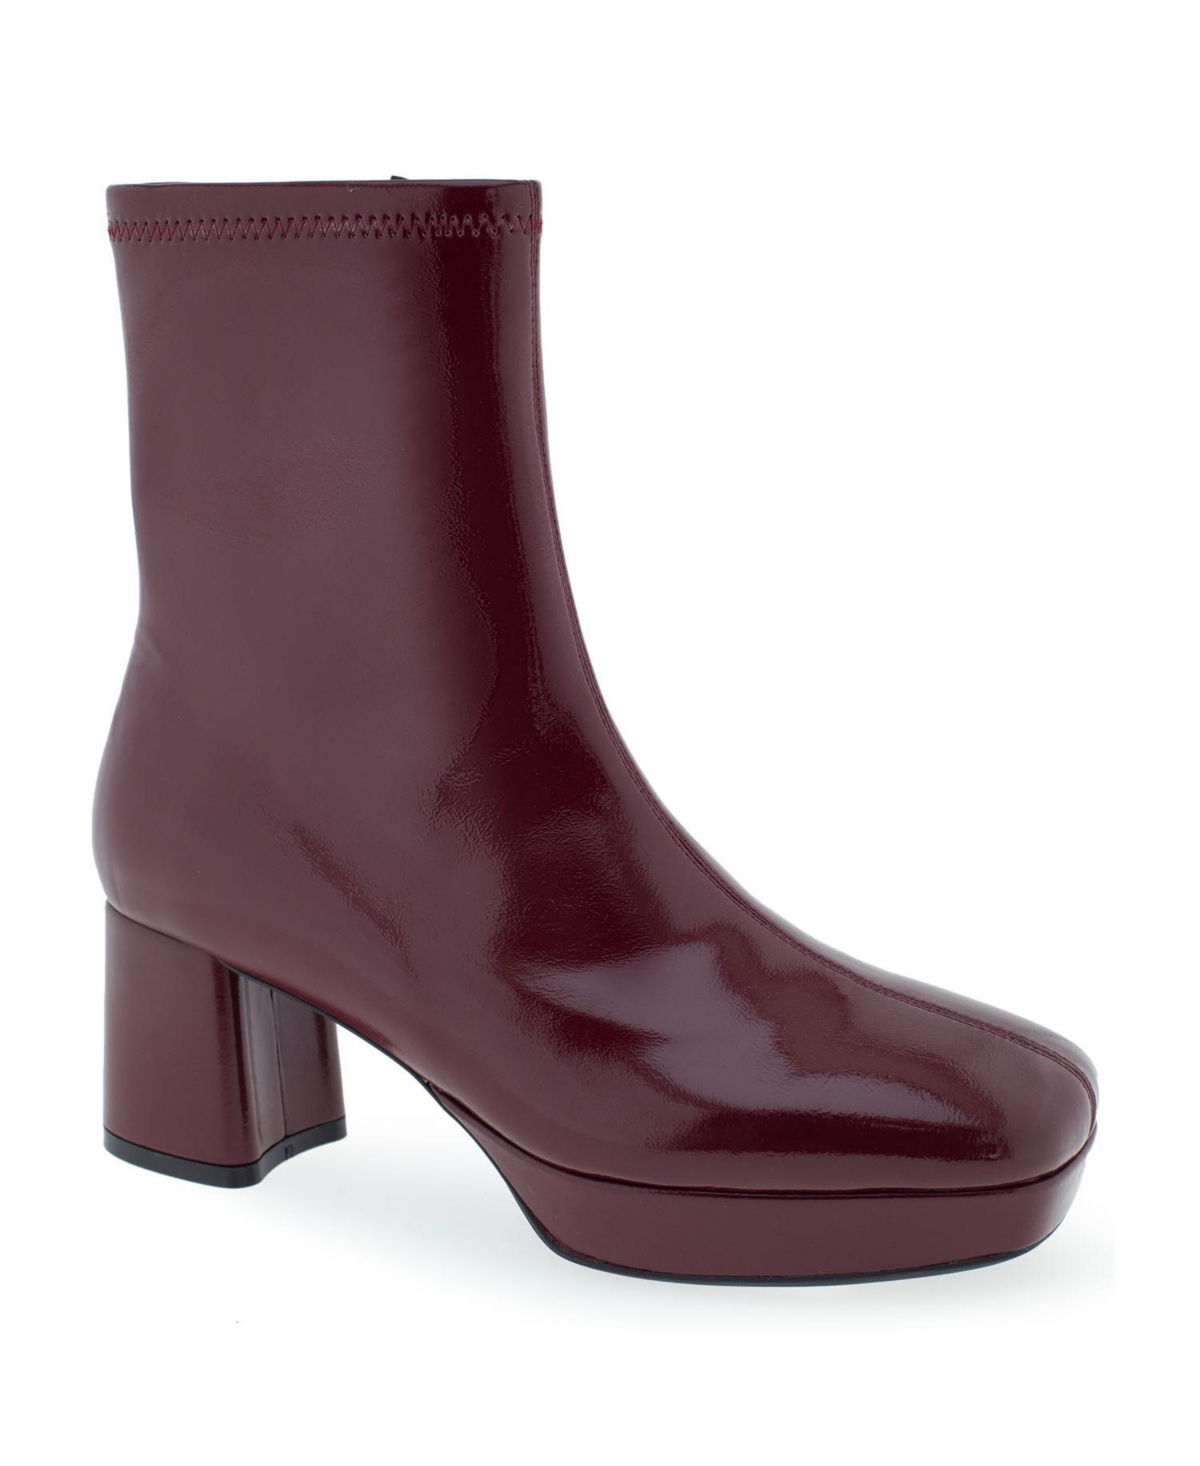 Sussex Boot-Midcalf Boot-Platform-High - Java Patent Polyurethane - Faux Leather